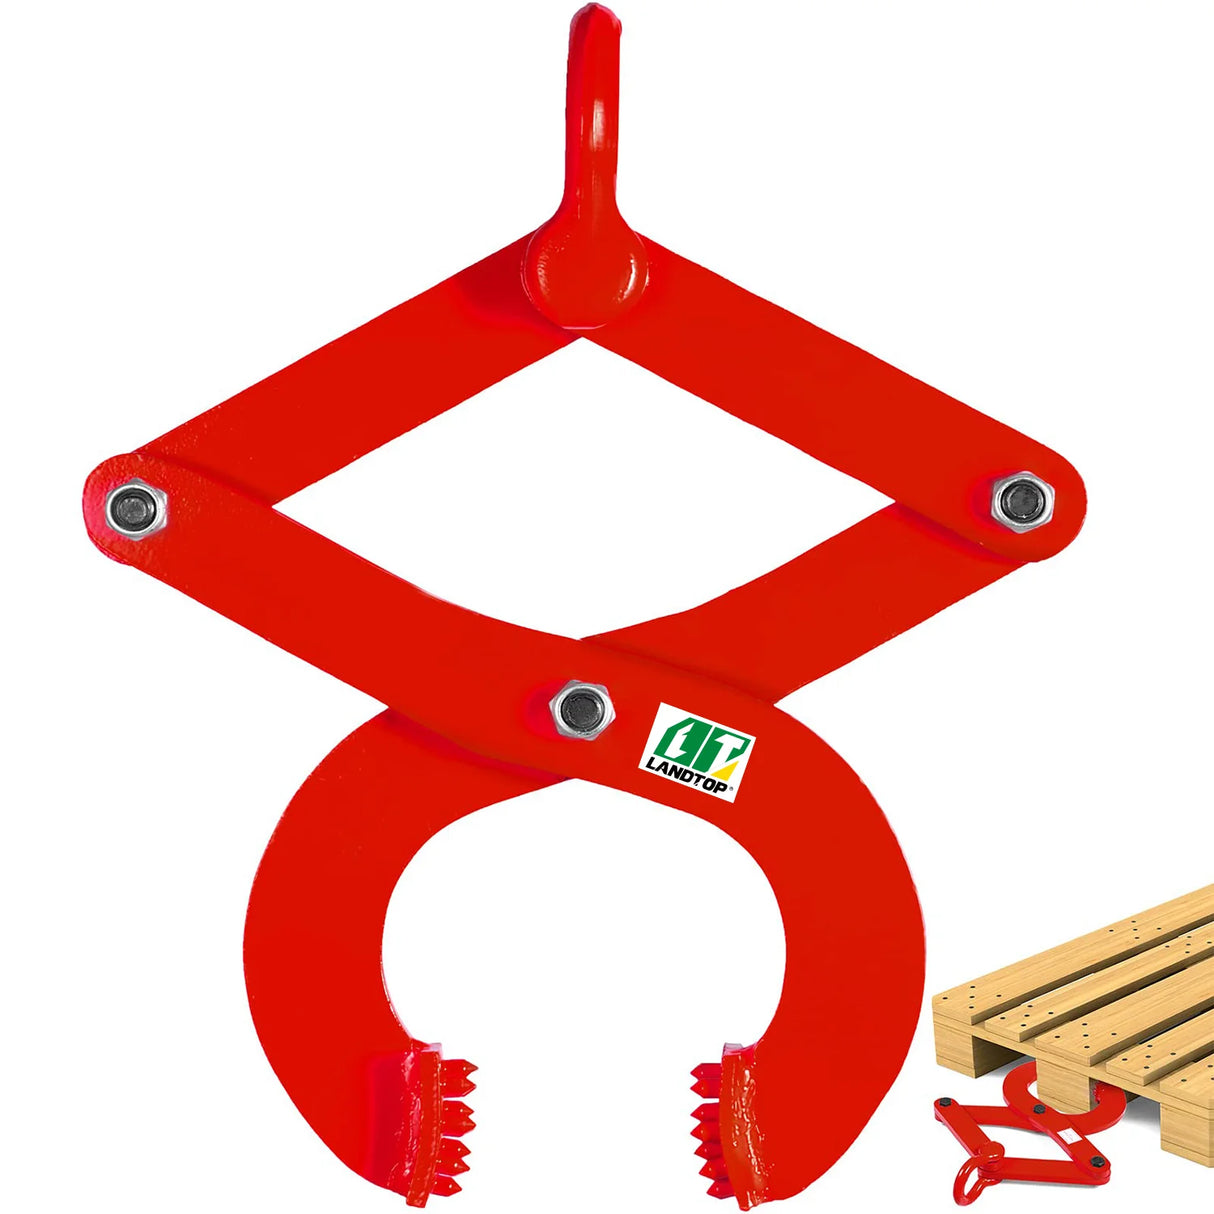 2T/4409lb Pallet Puller Steel Single Scissor Red Pallet Puller Clamp 4409 LBS Capacity Pallet Grabber 6.3 Inch Jaw Opening x 0.5 Inch Jaw Height arbitrarily Changed to Adjust The use